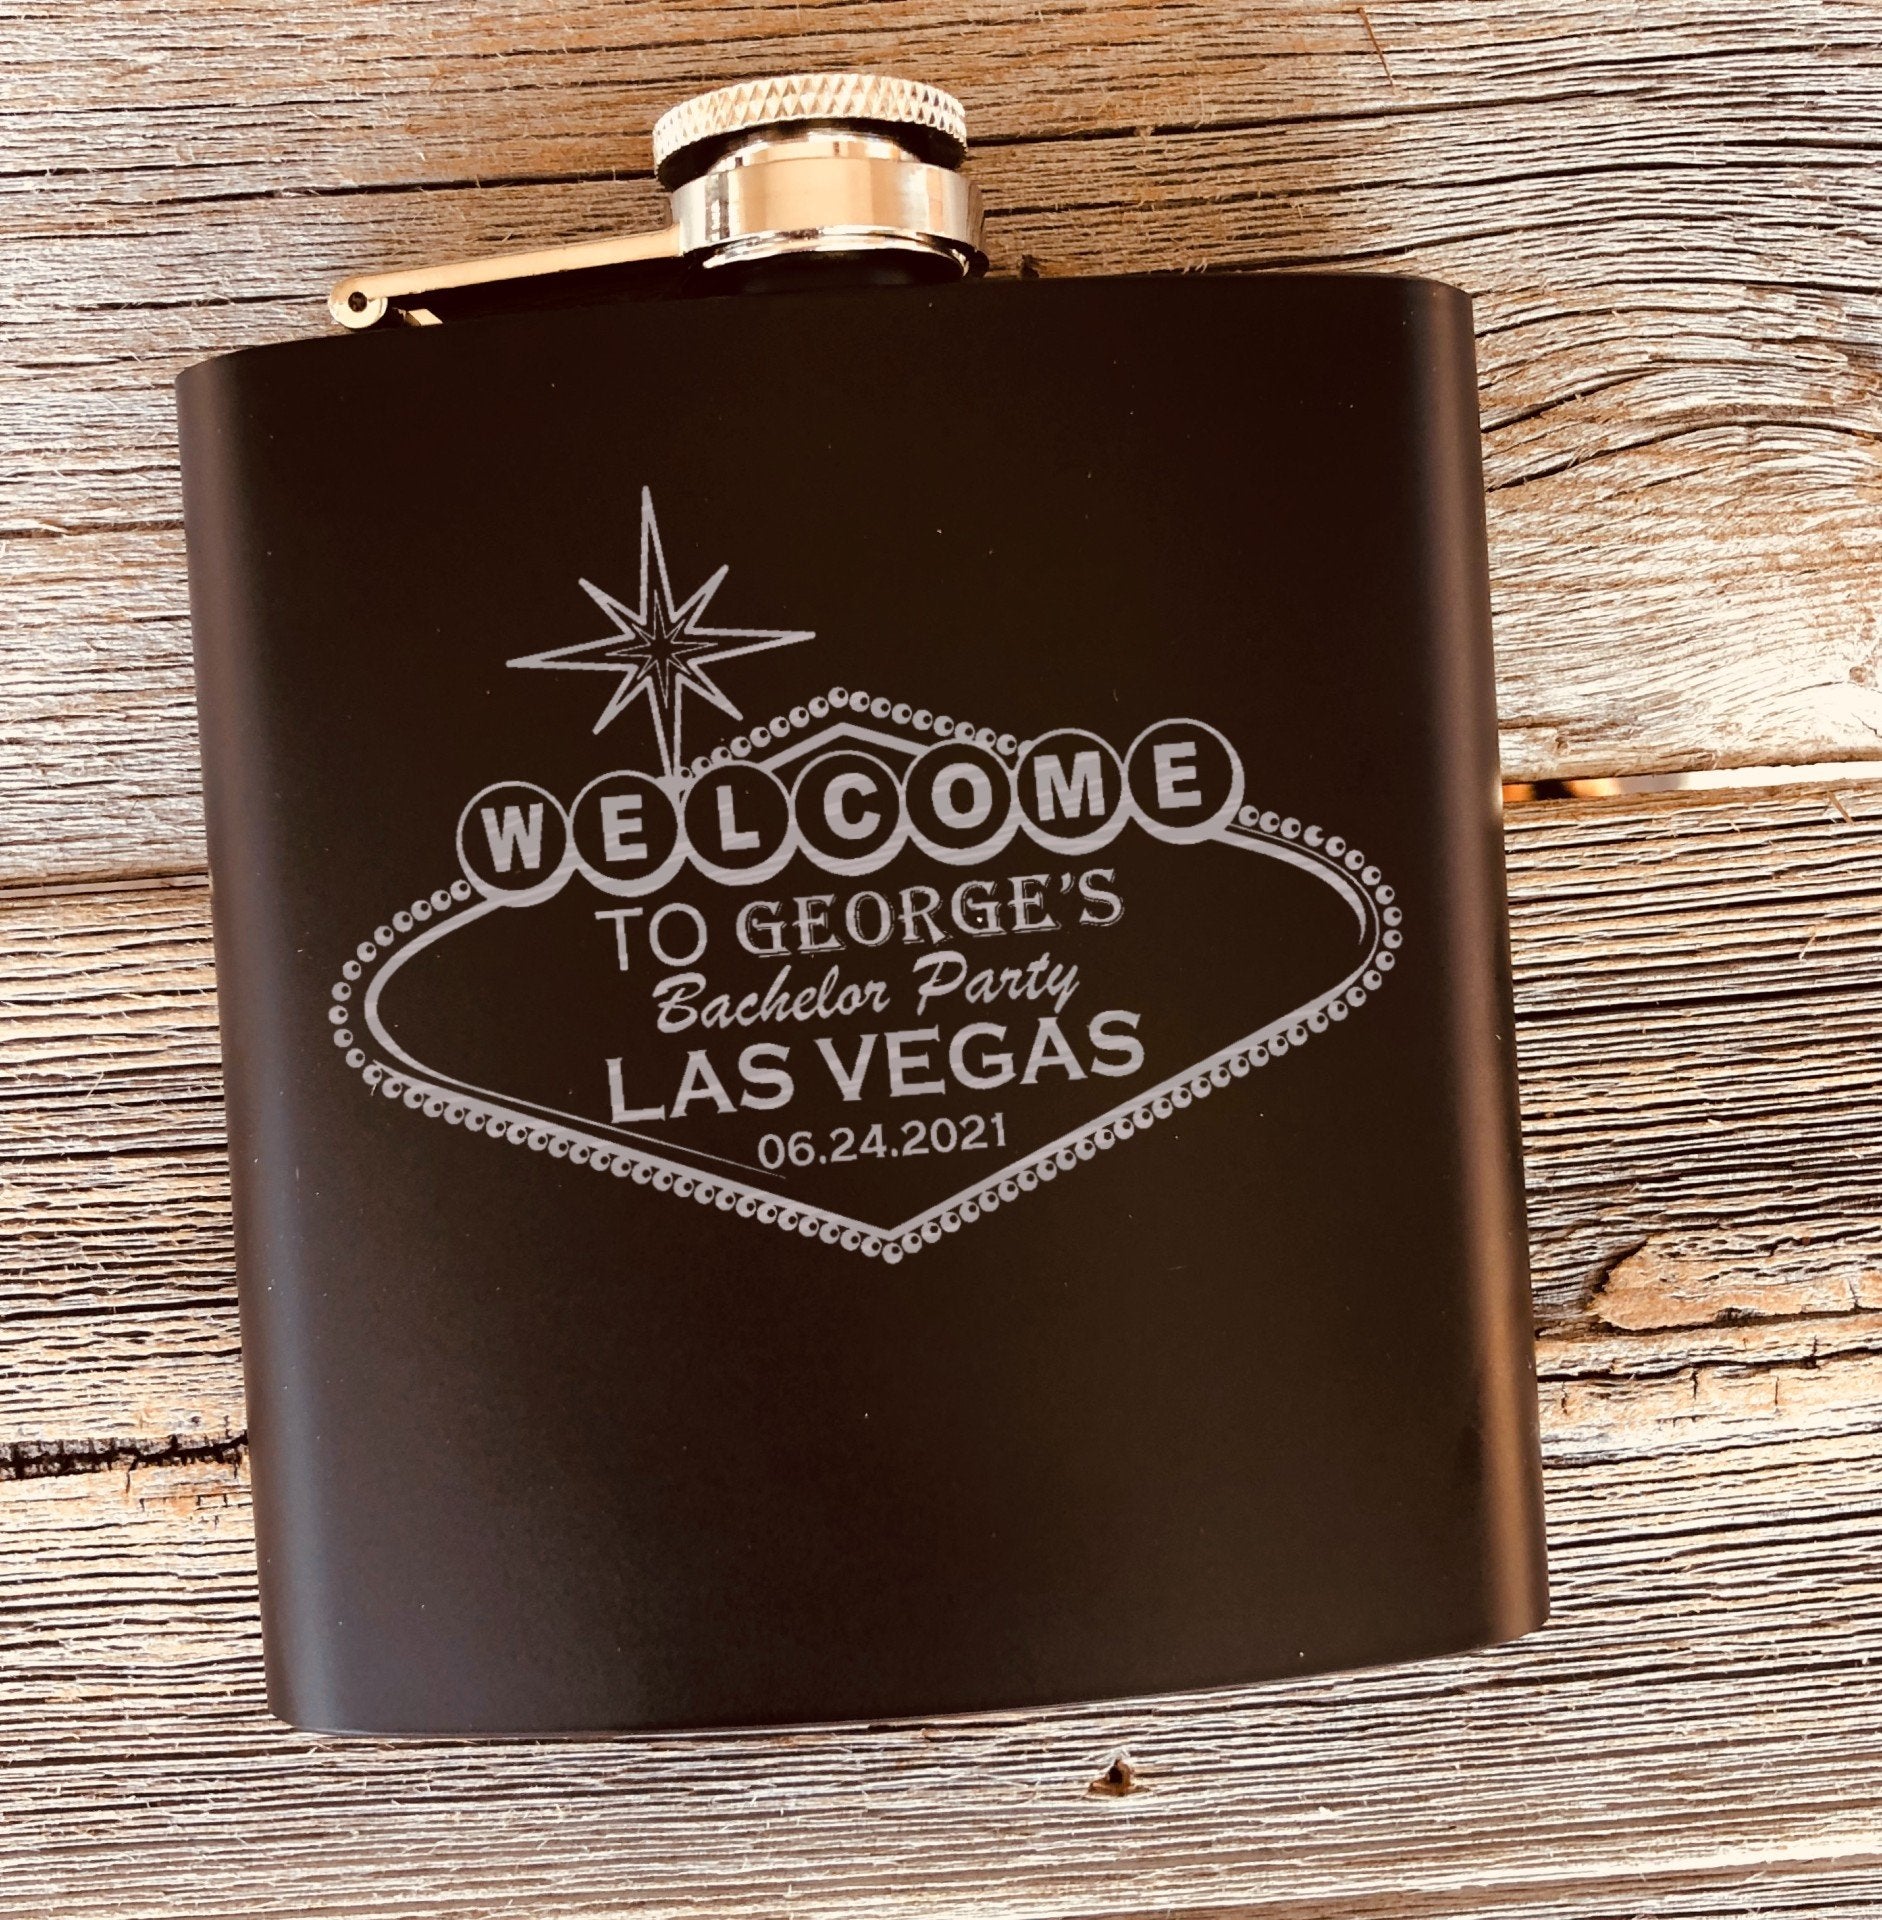 Personalized Groomsmen Gifts, Gifts For Men, Bachelor Party Gift